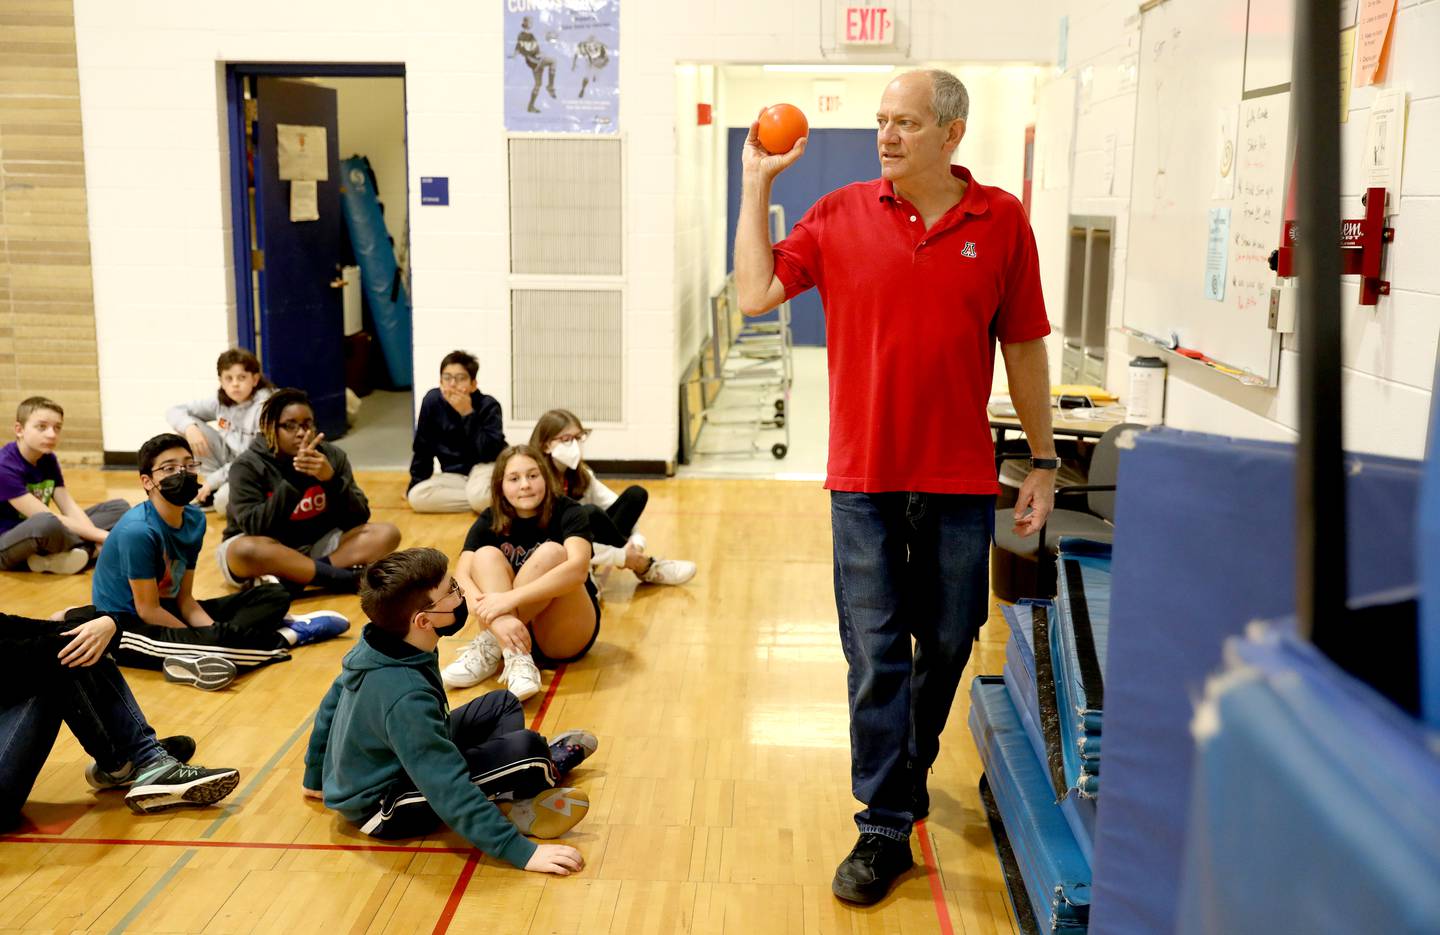 Physical education teacher Corey Toppel teaches a lesson on the shot put to sixth graders at Glen Crest MIddle School in Glen Ellyn. Toppel has been a teacher at the school for 32 years.